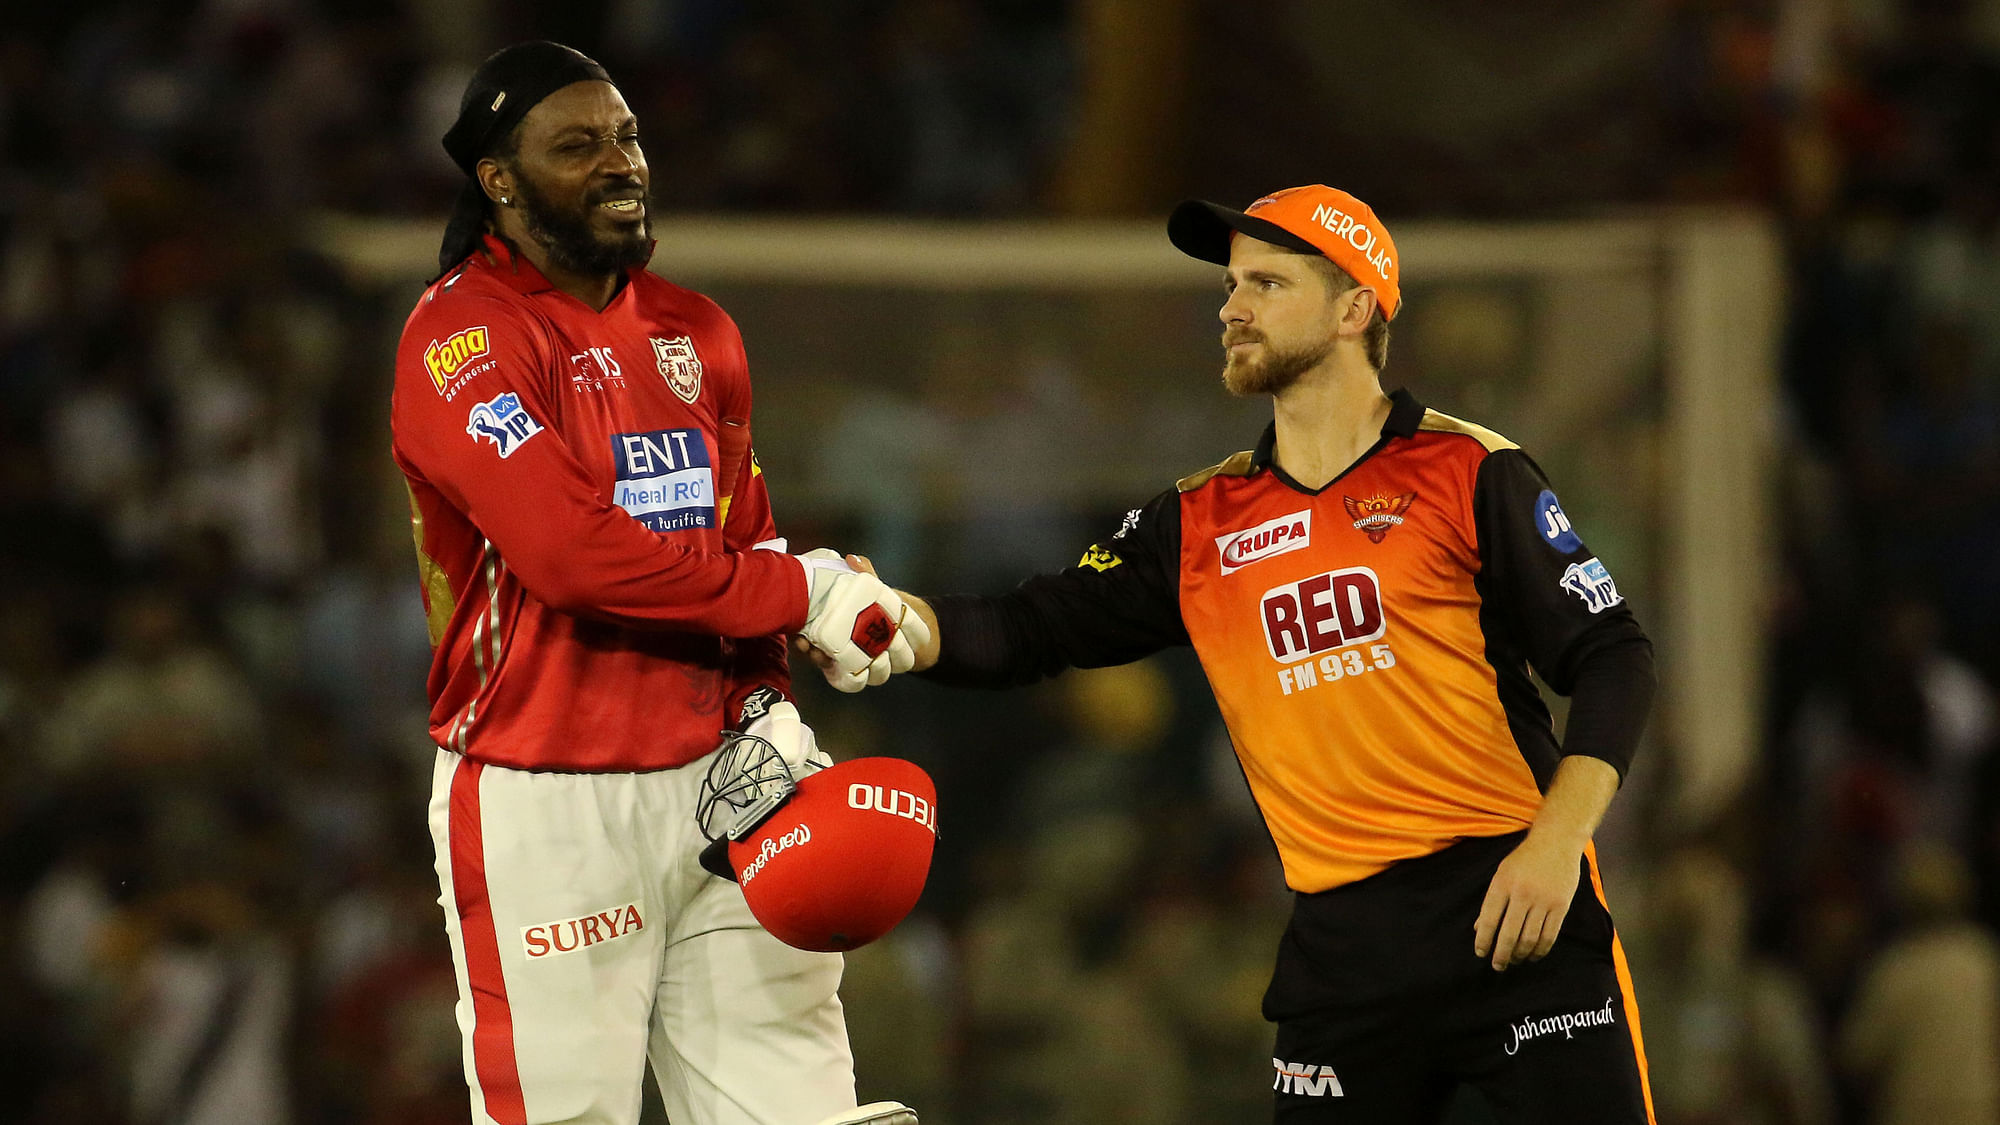 Kane Williamson greets Chris Gayle after the latter smashed a century against Sunrisers Hyderabad.